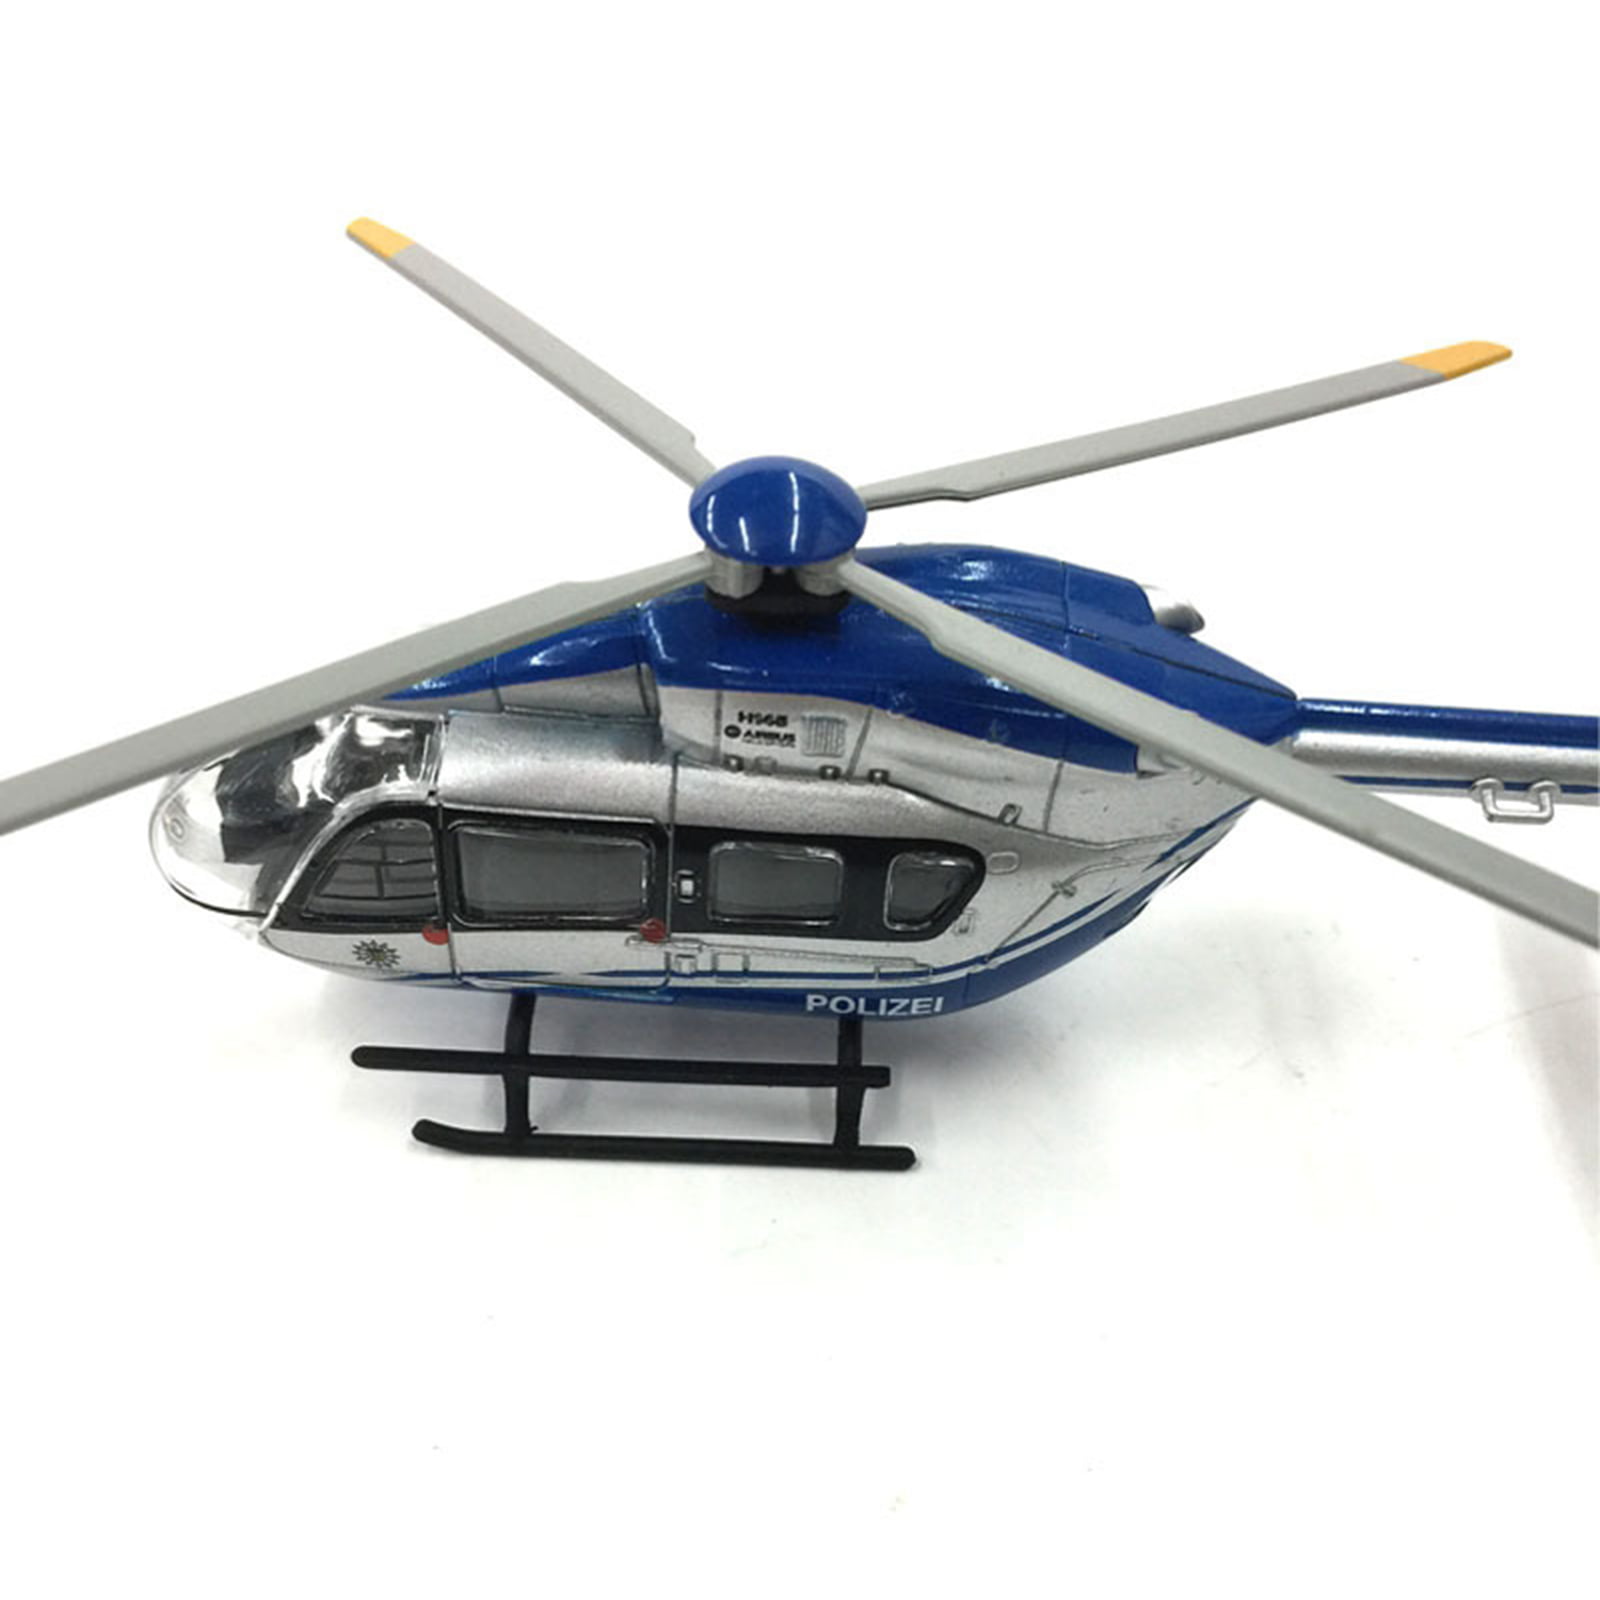 1/87 Scale Plane Aircraft Airbus Helicopter H145 Polizei Schuco Model Toy 